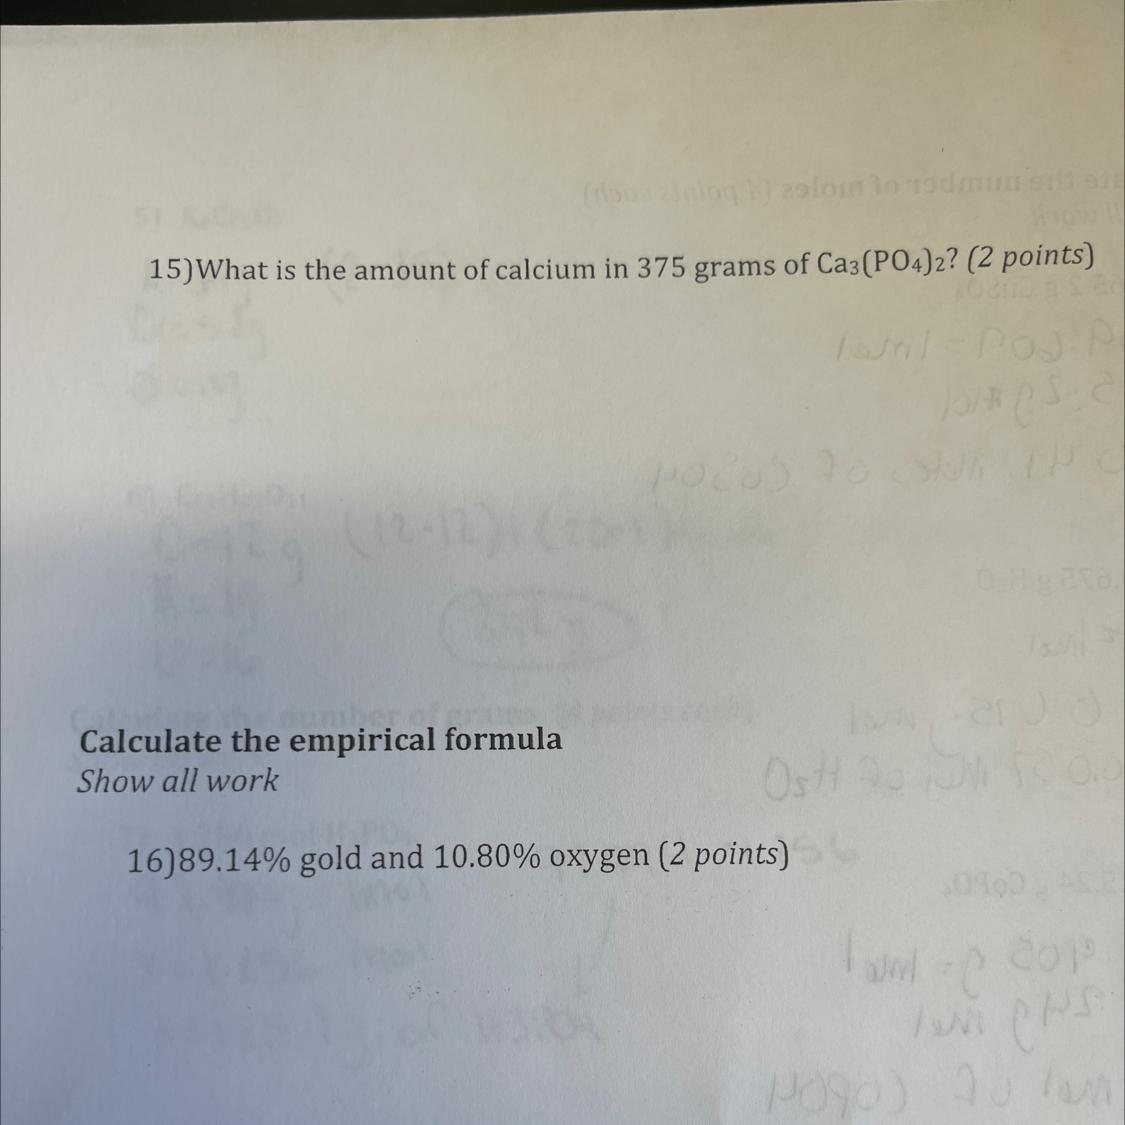 Could You Calculate The Percent Composition For 15 And The Empirical Formal For 16 